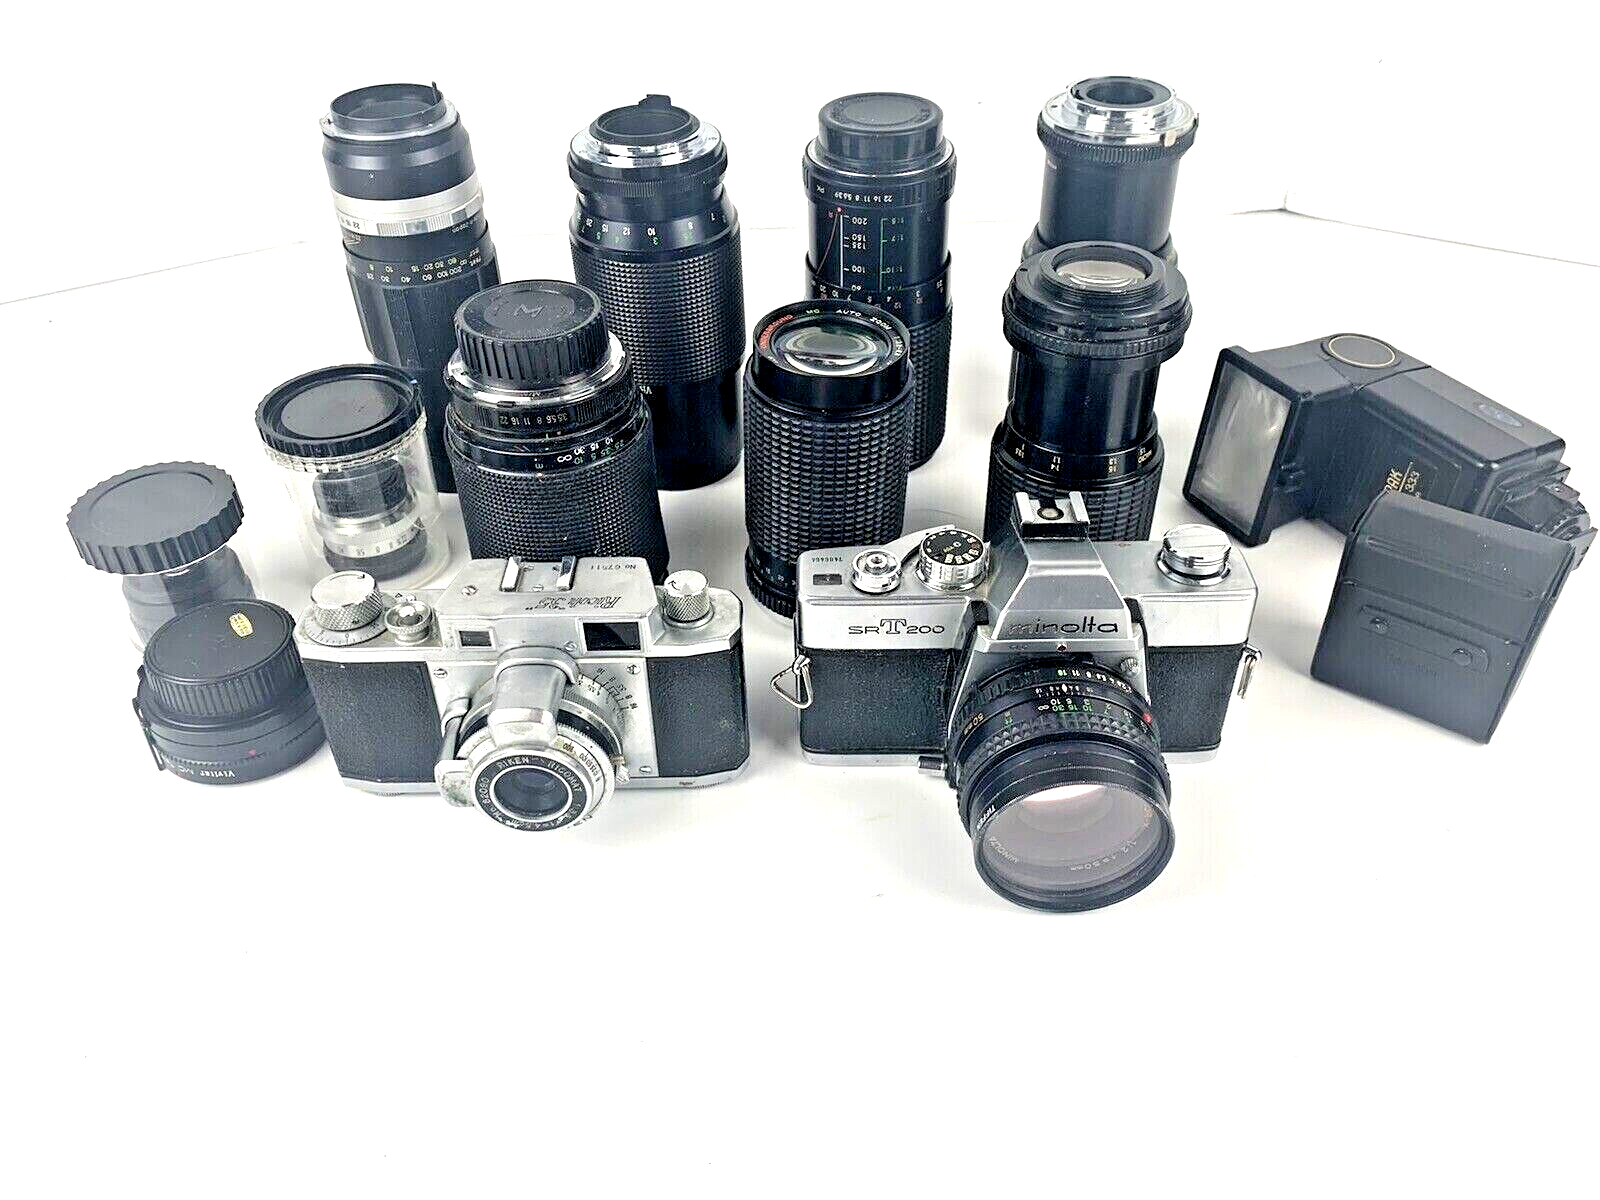 Lot of 18 Including Cameras, Lens, and Accessories -Minolta srT200 & Ricoh "35"  Без бренда N/A